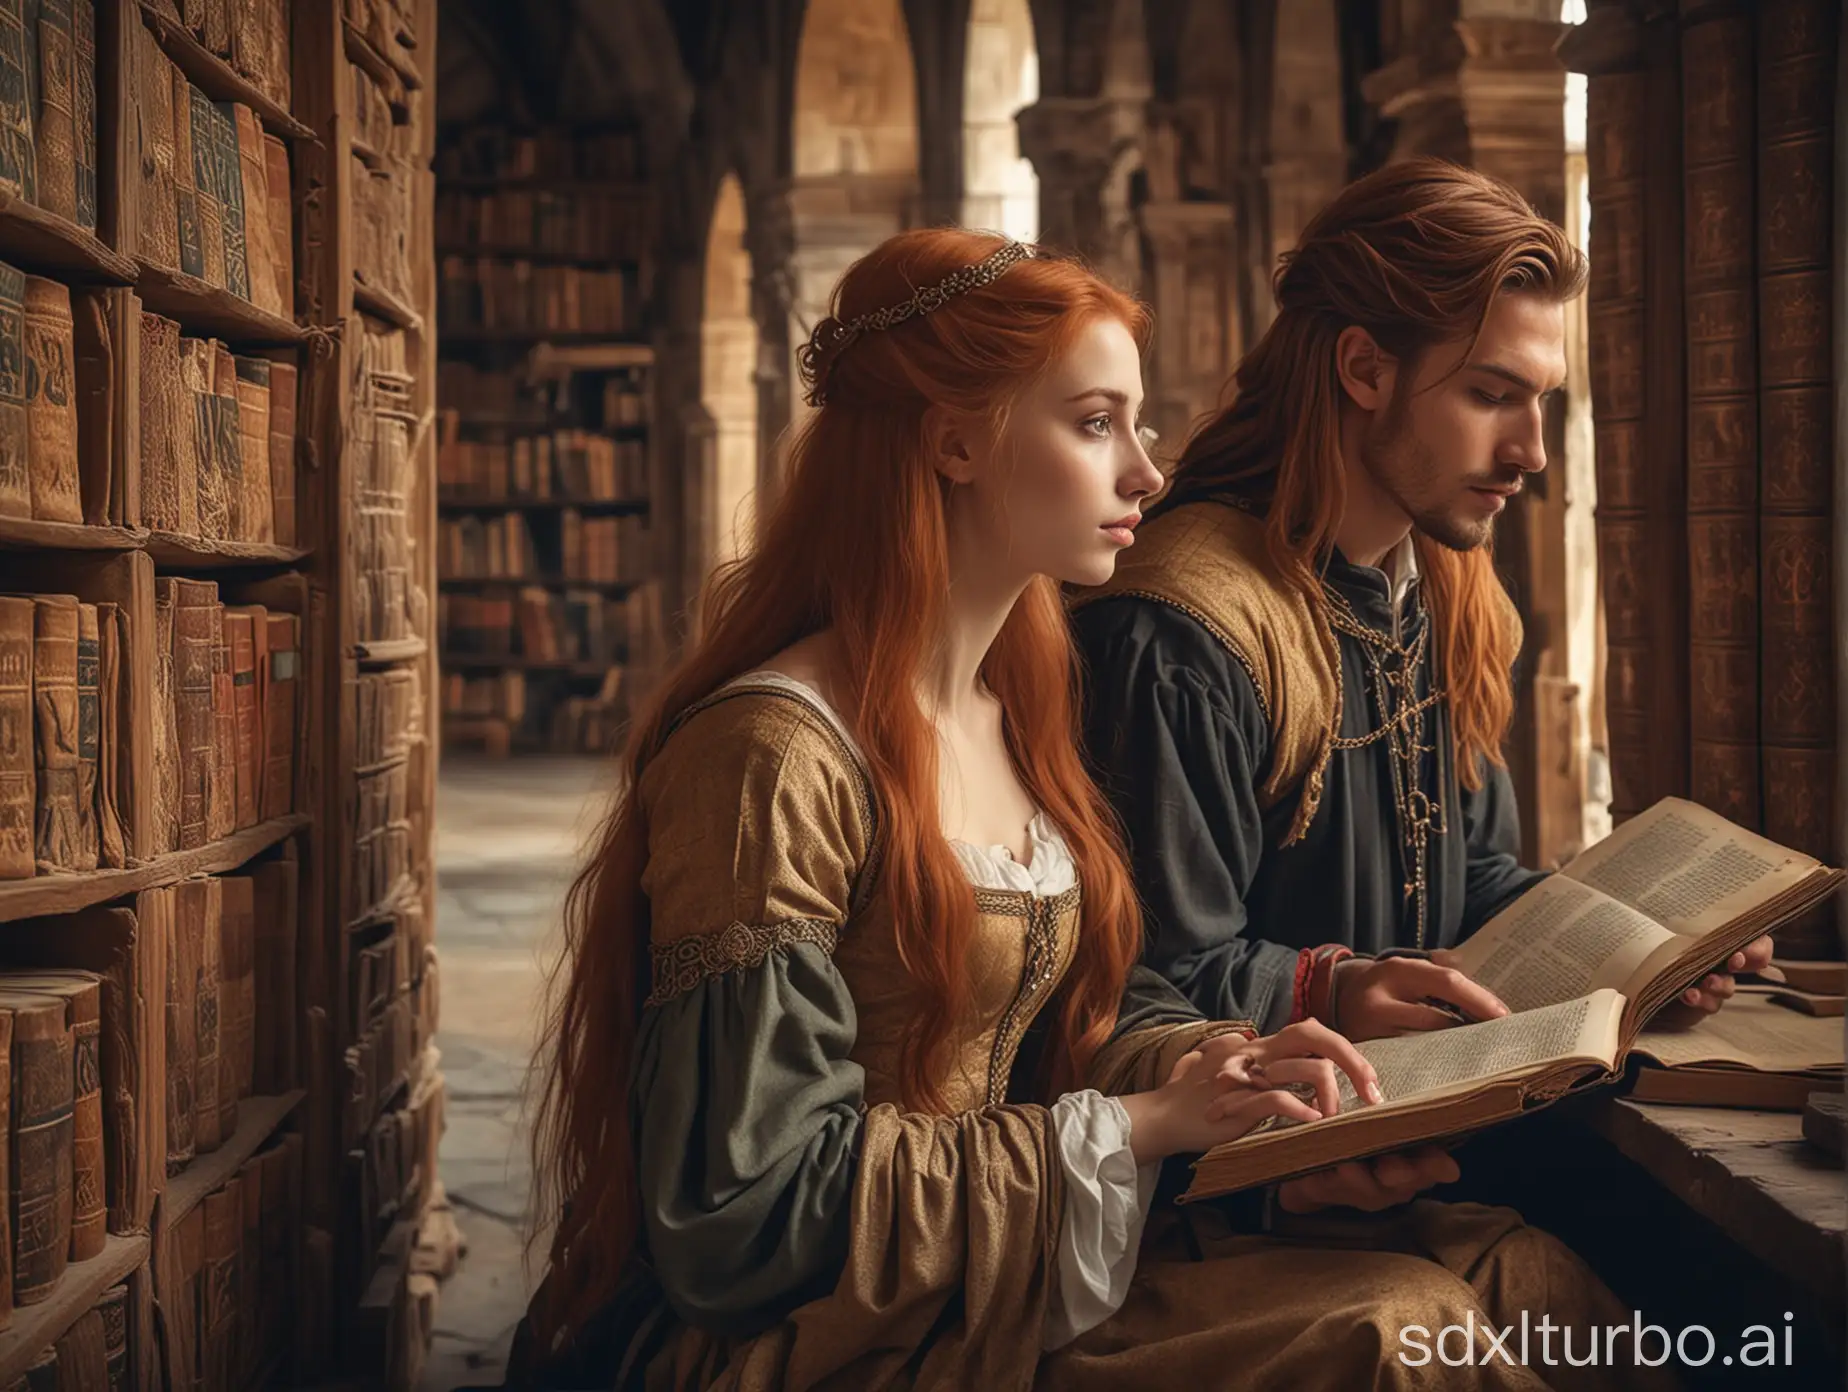 Medieval-Couple-Reading-Ancient-Folio-in-Grand-Library